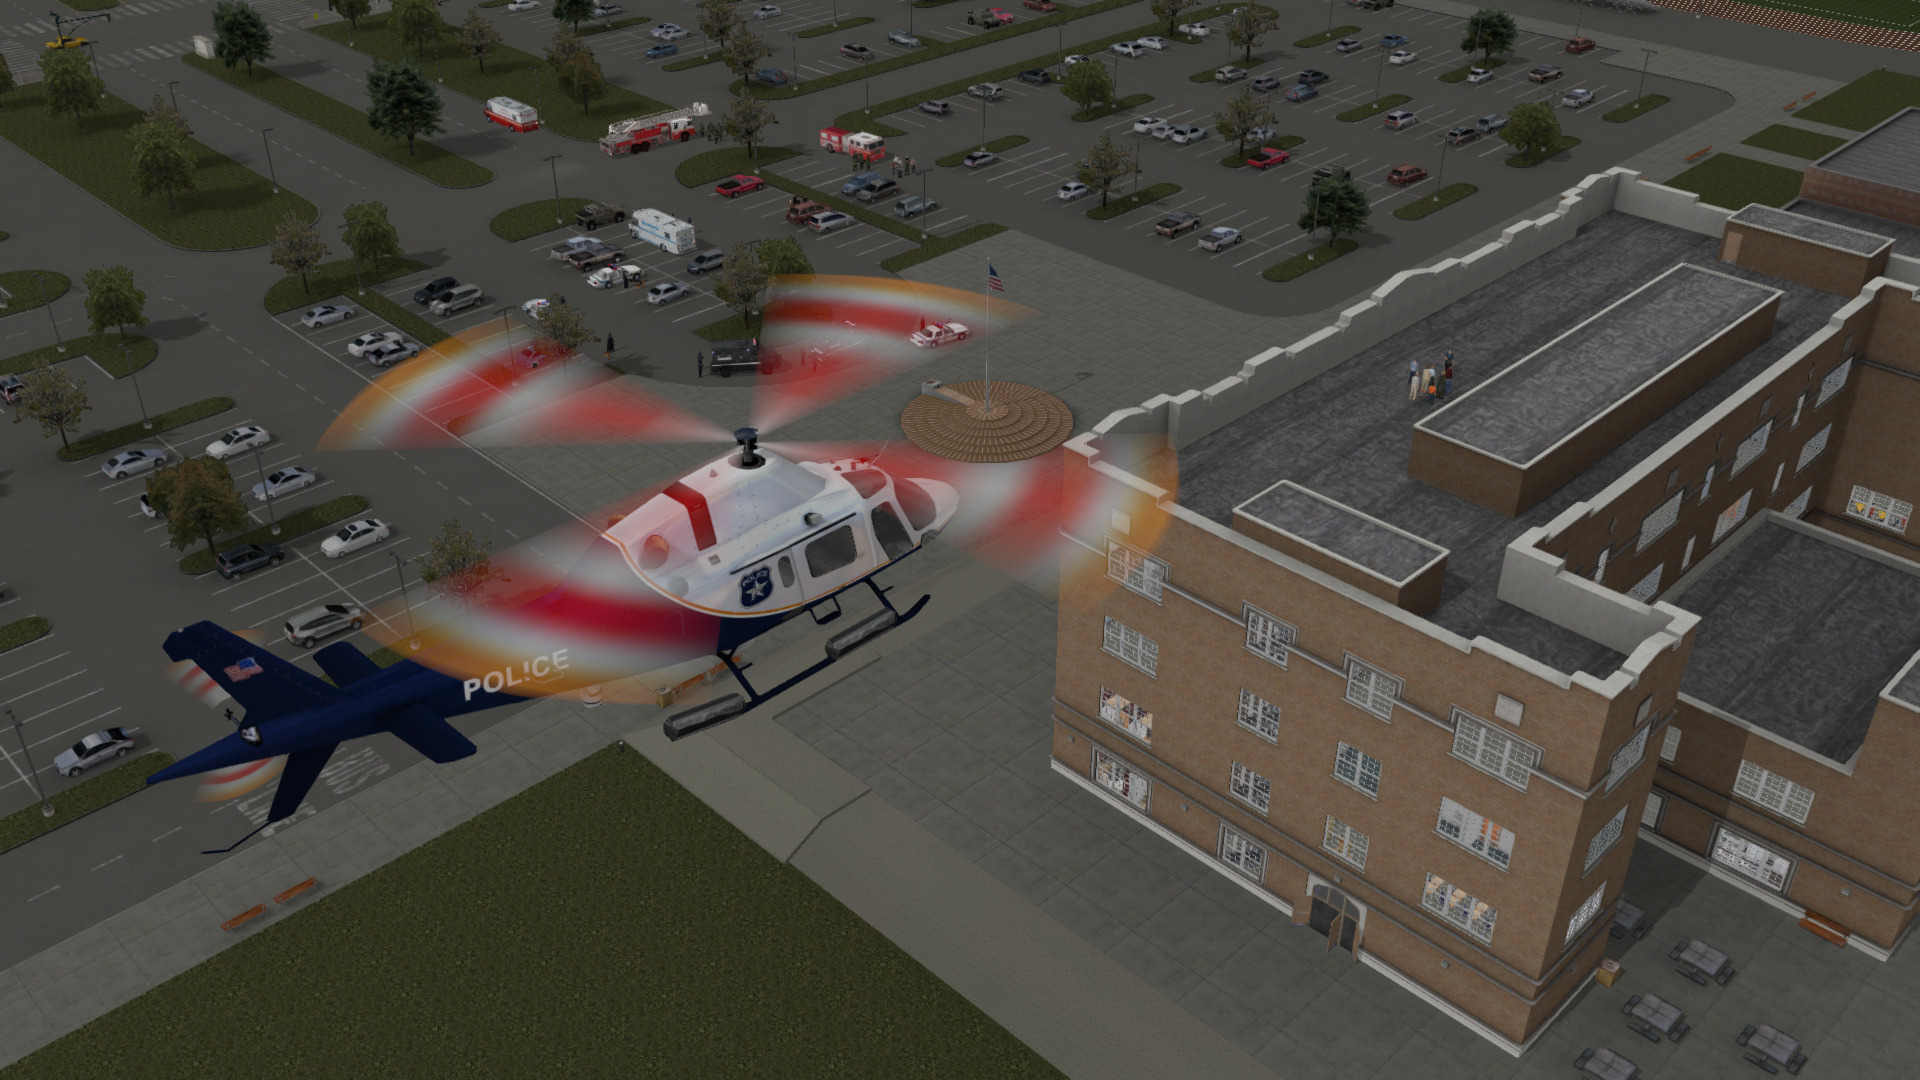 Police helicopter observing a hostage situation on top of a school. The pilot is training together with police on the ground.